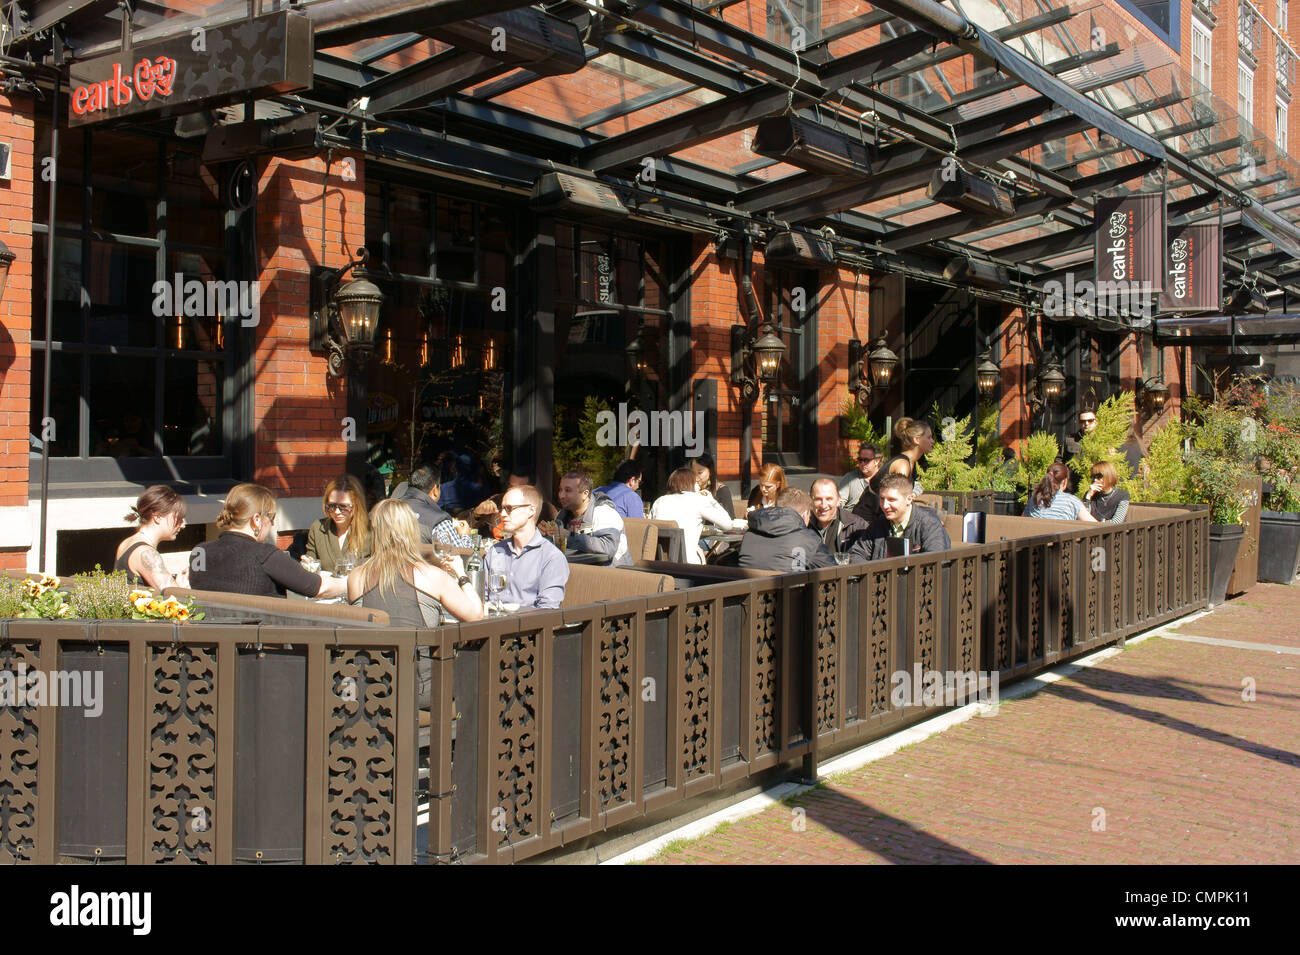 People eating lunch outdoors at Earls restaurant in Yaletown, Vancouver, British Columbia, Canada Stock Photo